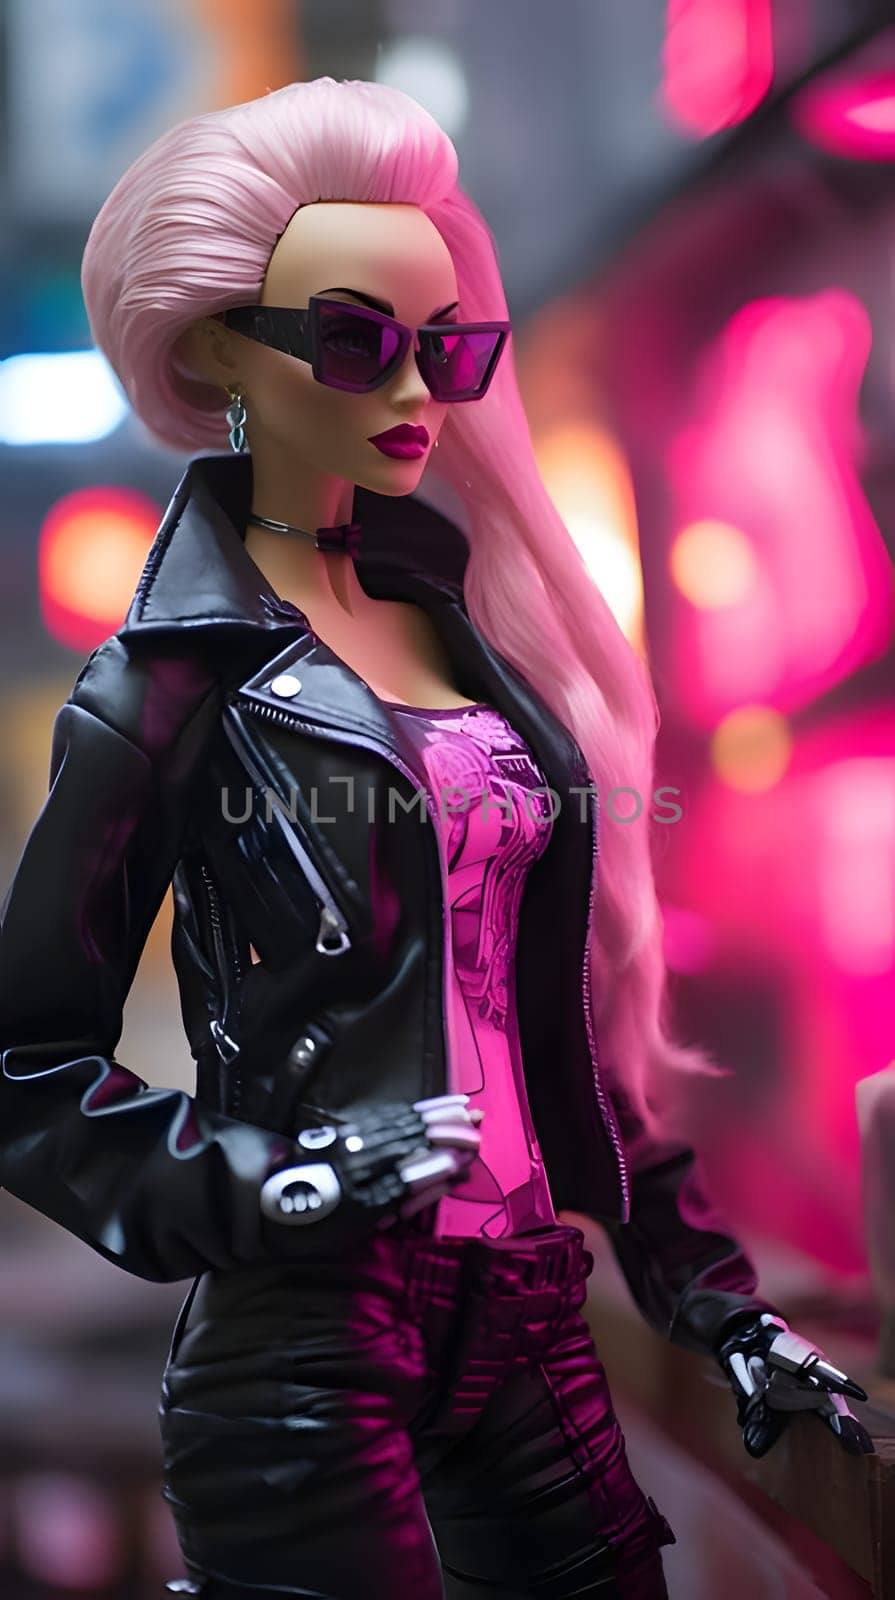 Cute blonde Barbie looks chic in her black outfit, standing confidently next to her sleek motorcycle, against a blurred pink background, adding a touch of style and adventure.